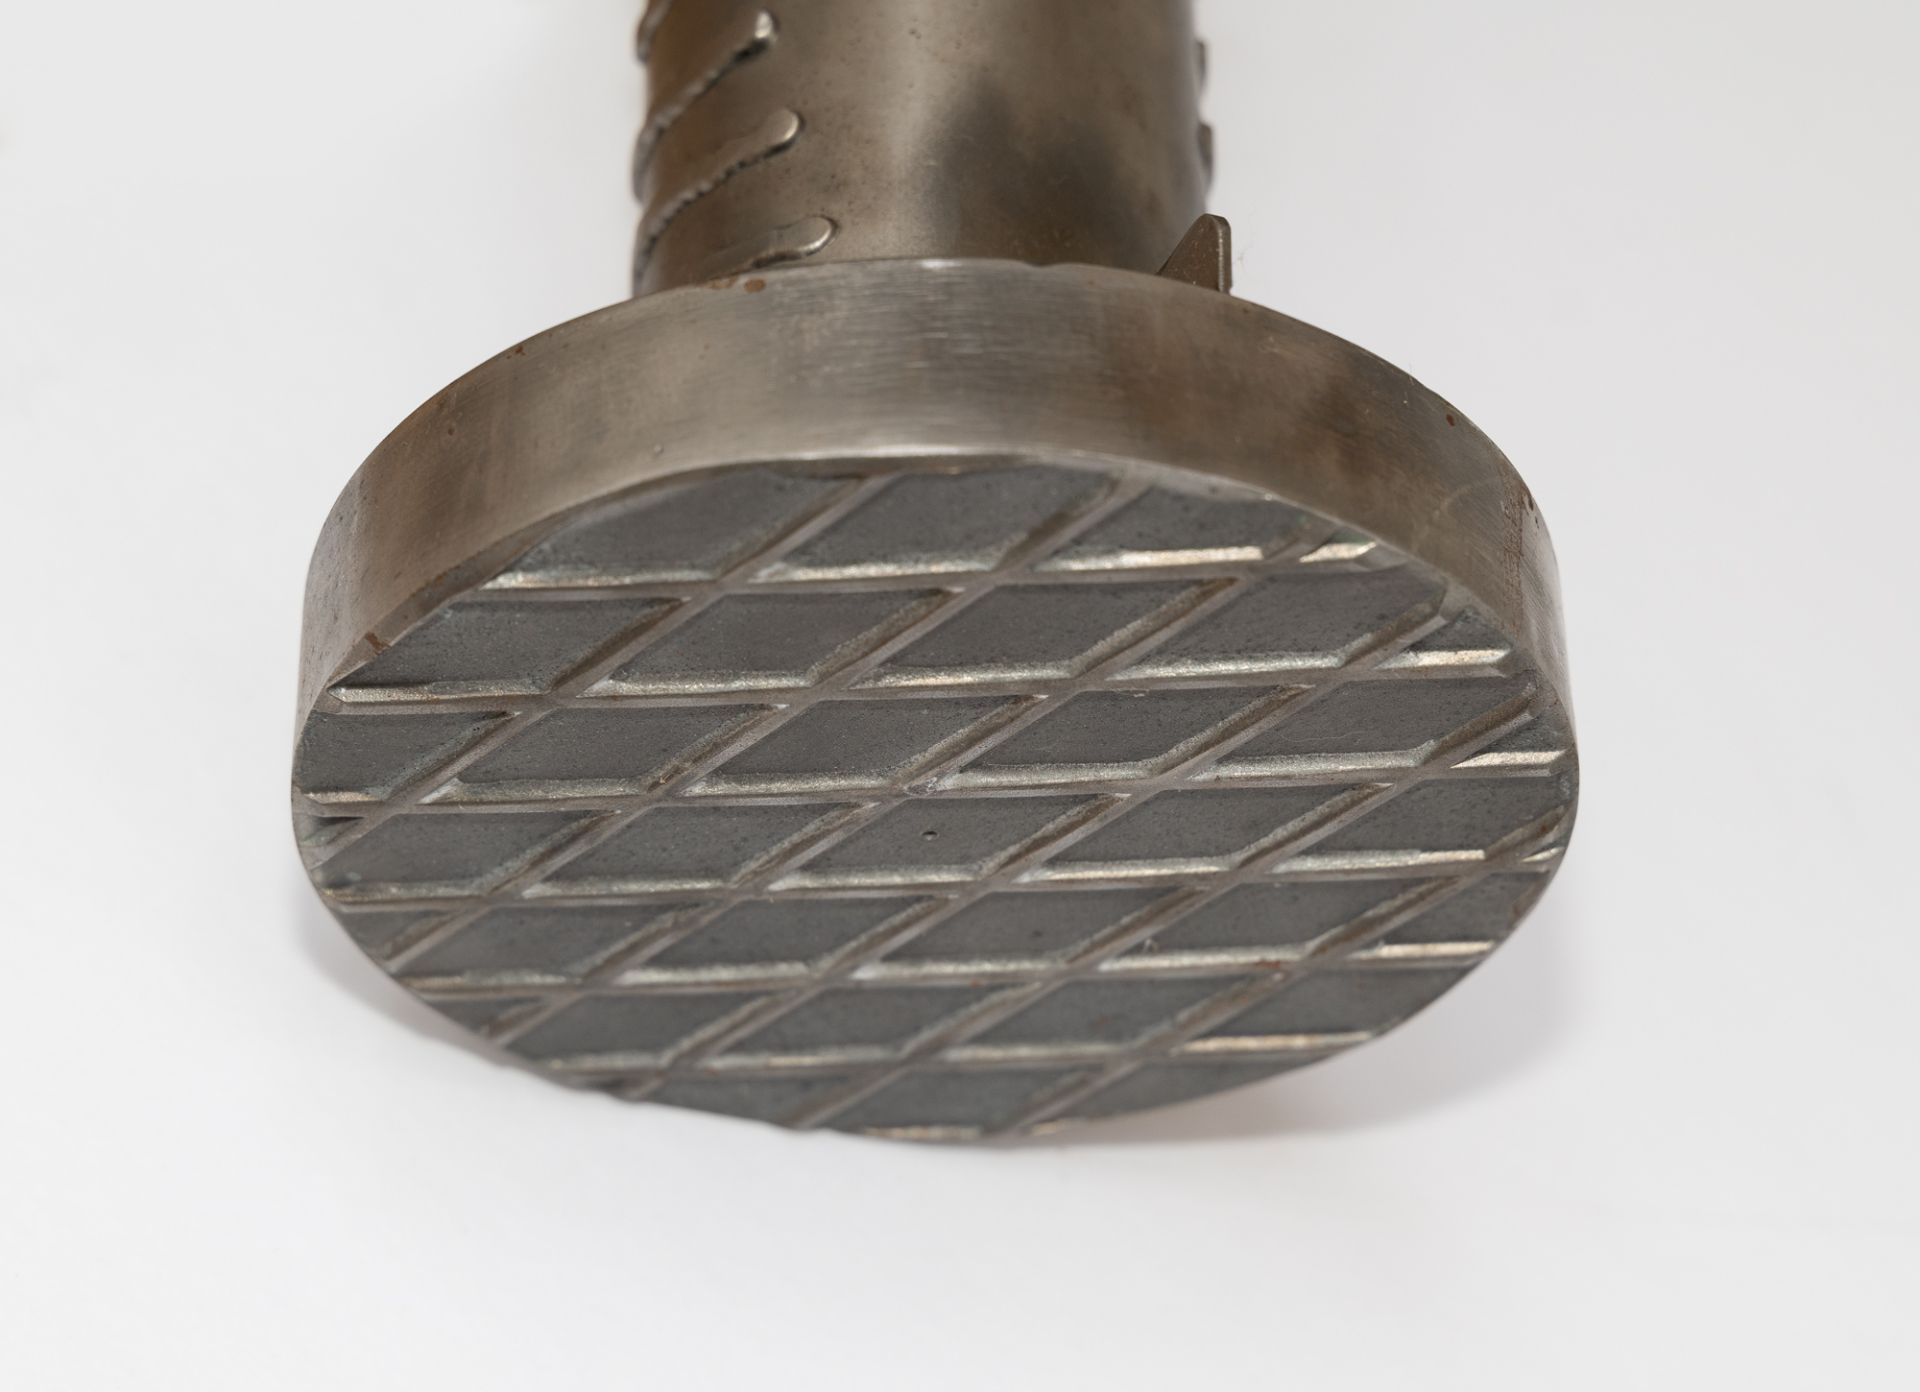 Günther Uecker (1930 Wendorf) – Nail.Steel, hand-forged. (1989). C. 178 x 17 x 17 cm. One of an - Image 6 of 8